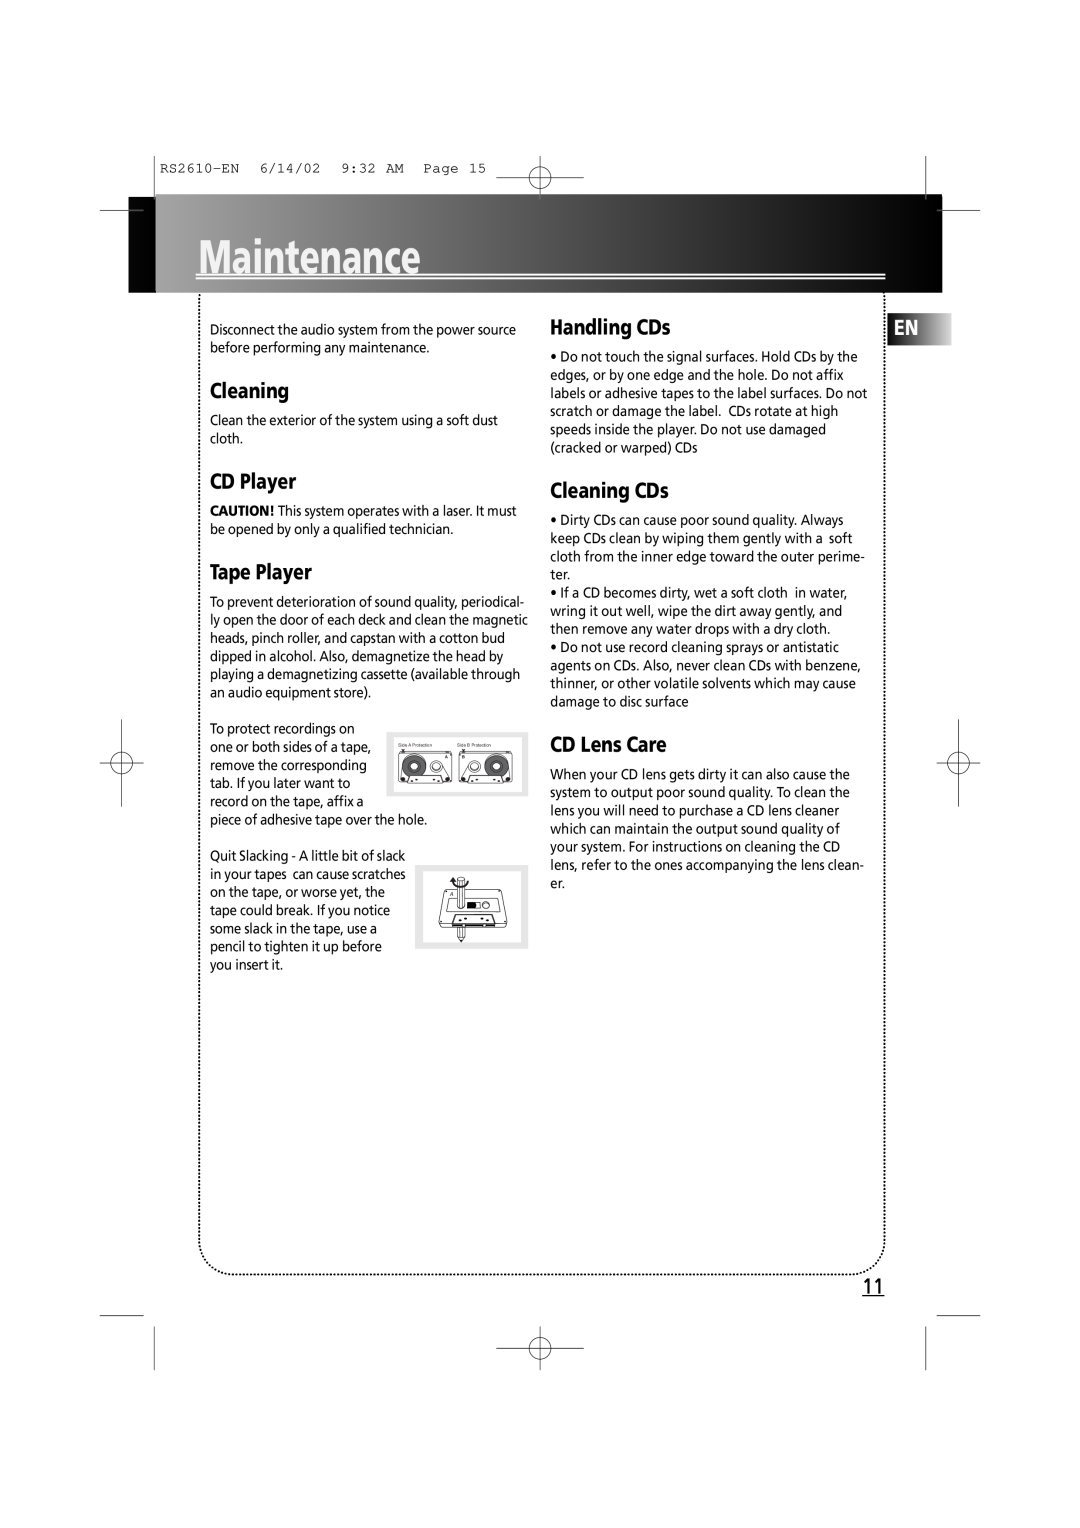 RCA fm radio tuner manual Maintenance, CD Player, Tape Player, Handling CDs, Cleaning CDs, CD Lens Care 